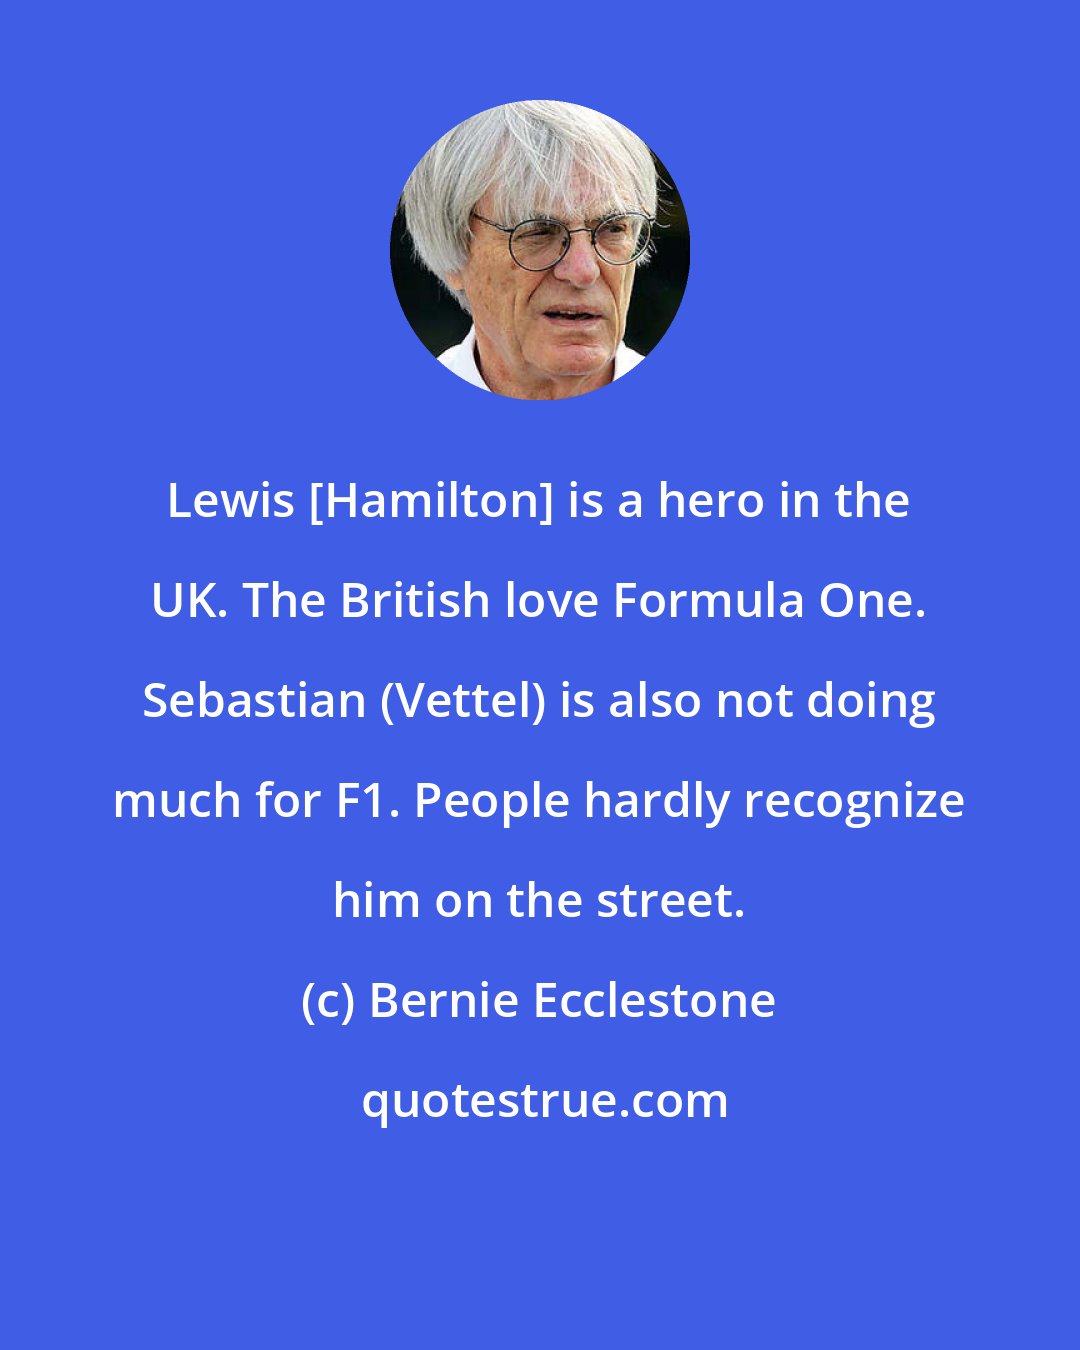 Bernie Ecclestone: Lewis [Hamilton] is a hero in the UK. The British love Formula One. Sebastian (Vettel) is also not doing much for F1. People hardly recognize him on the street.